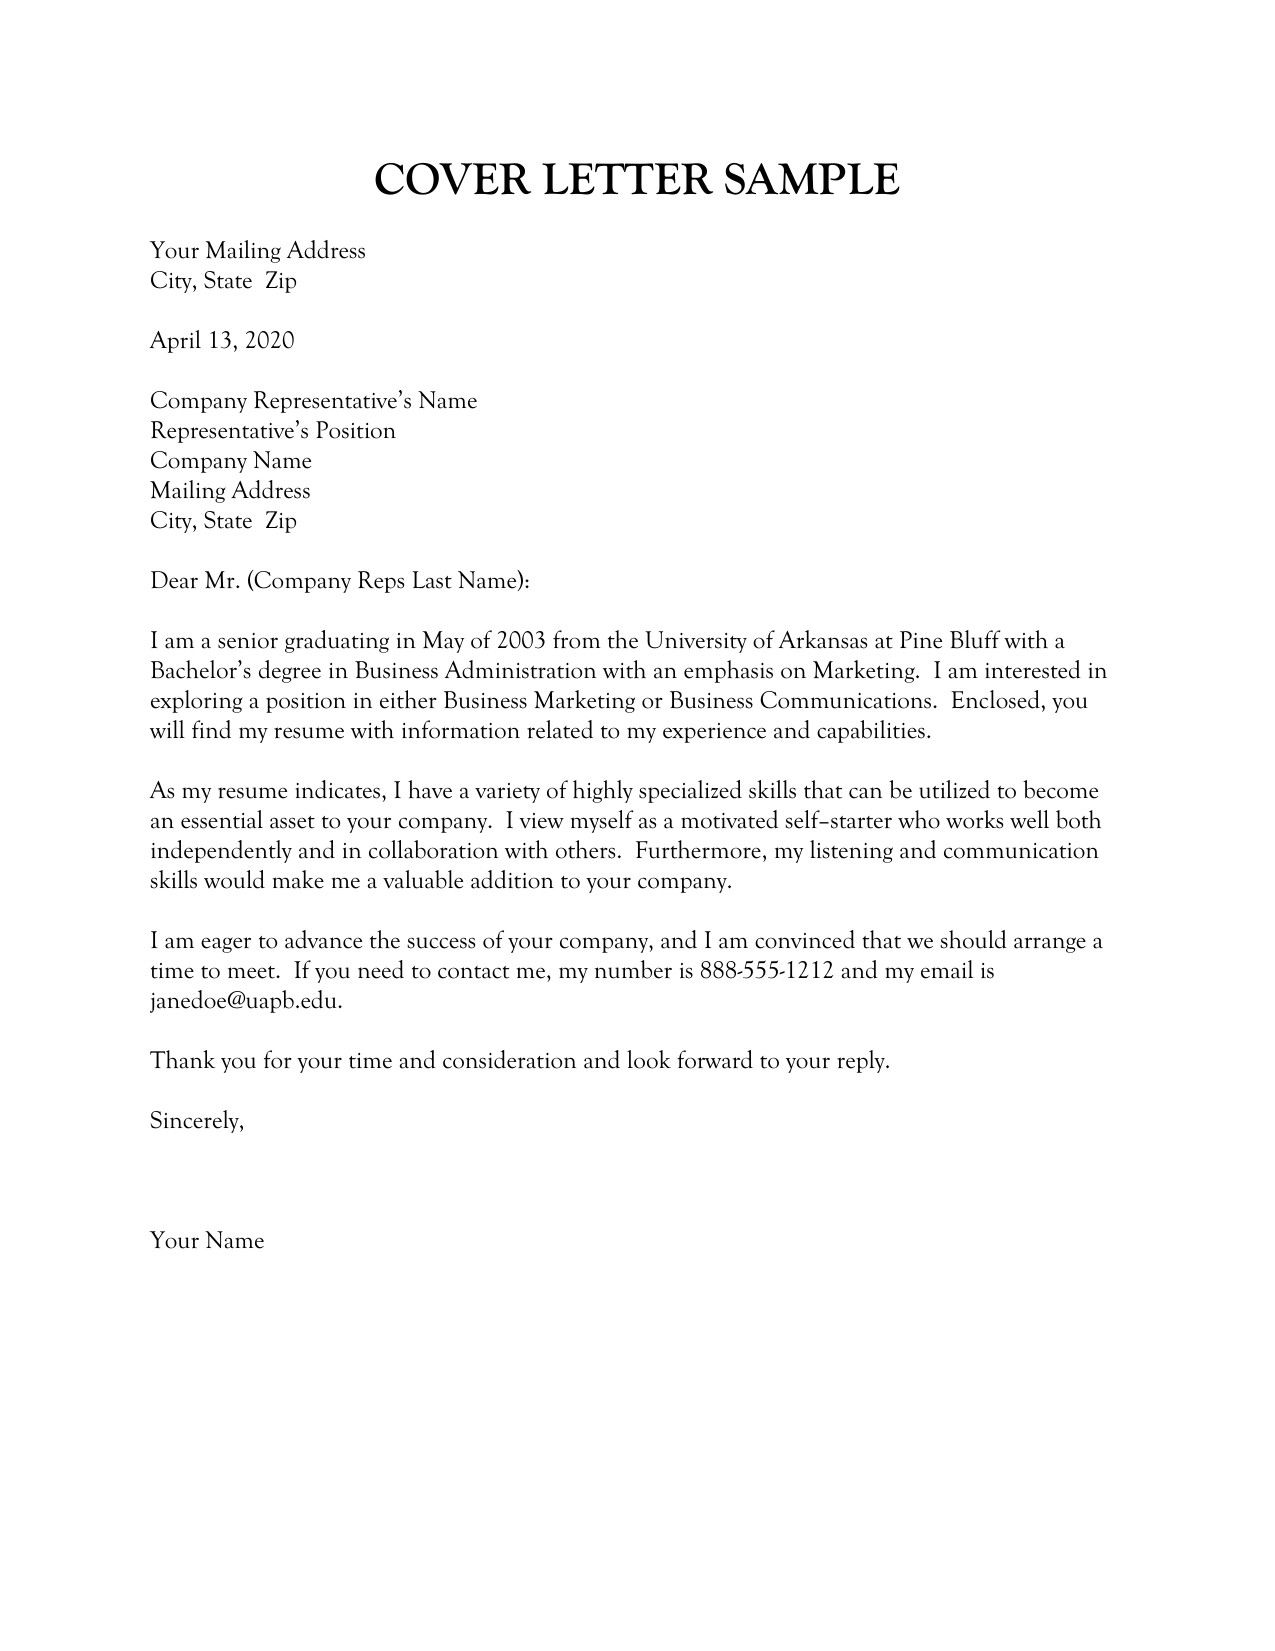 Business Collaboration Letter Sample | HQ Template Documents